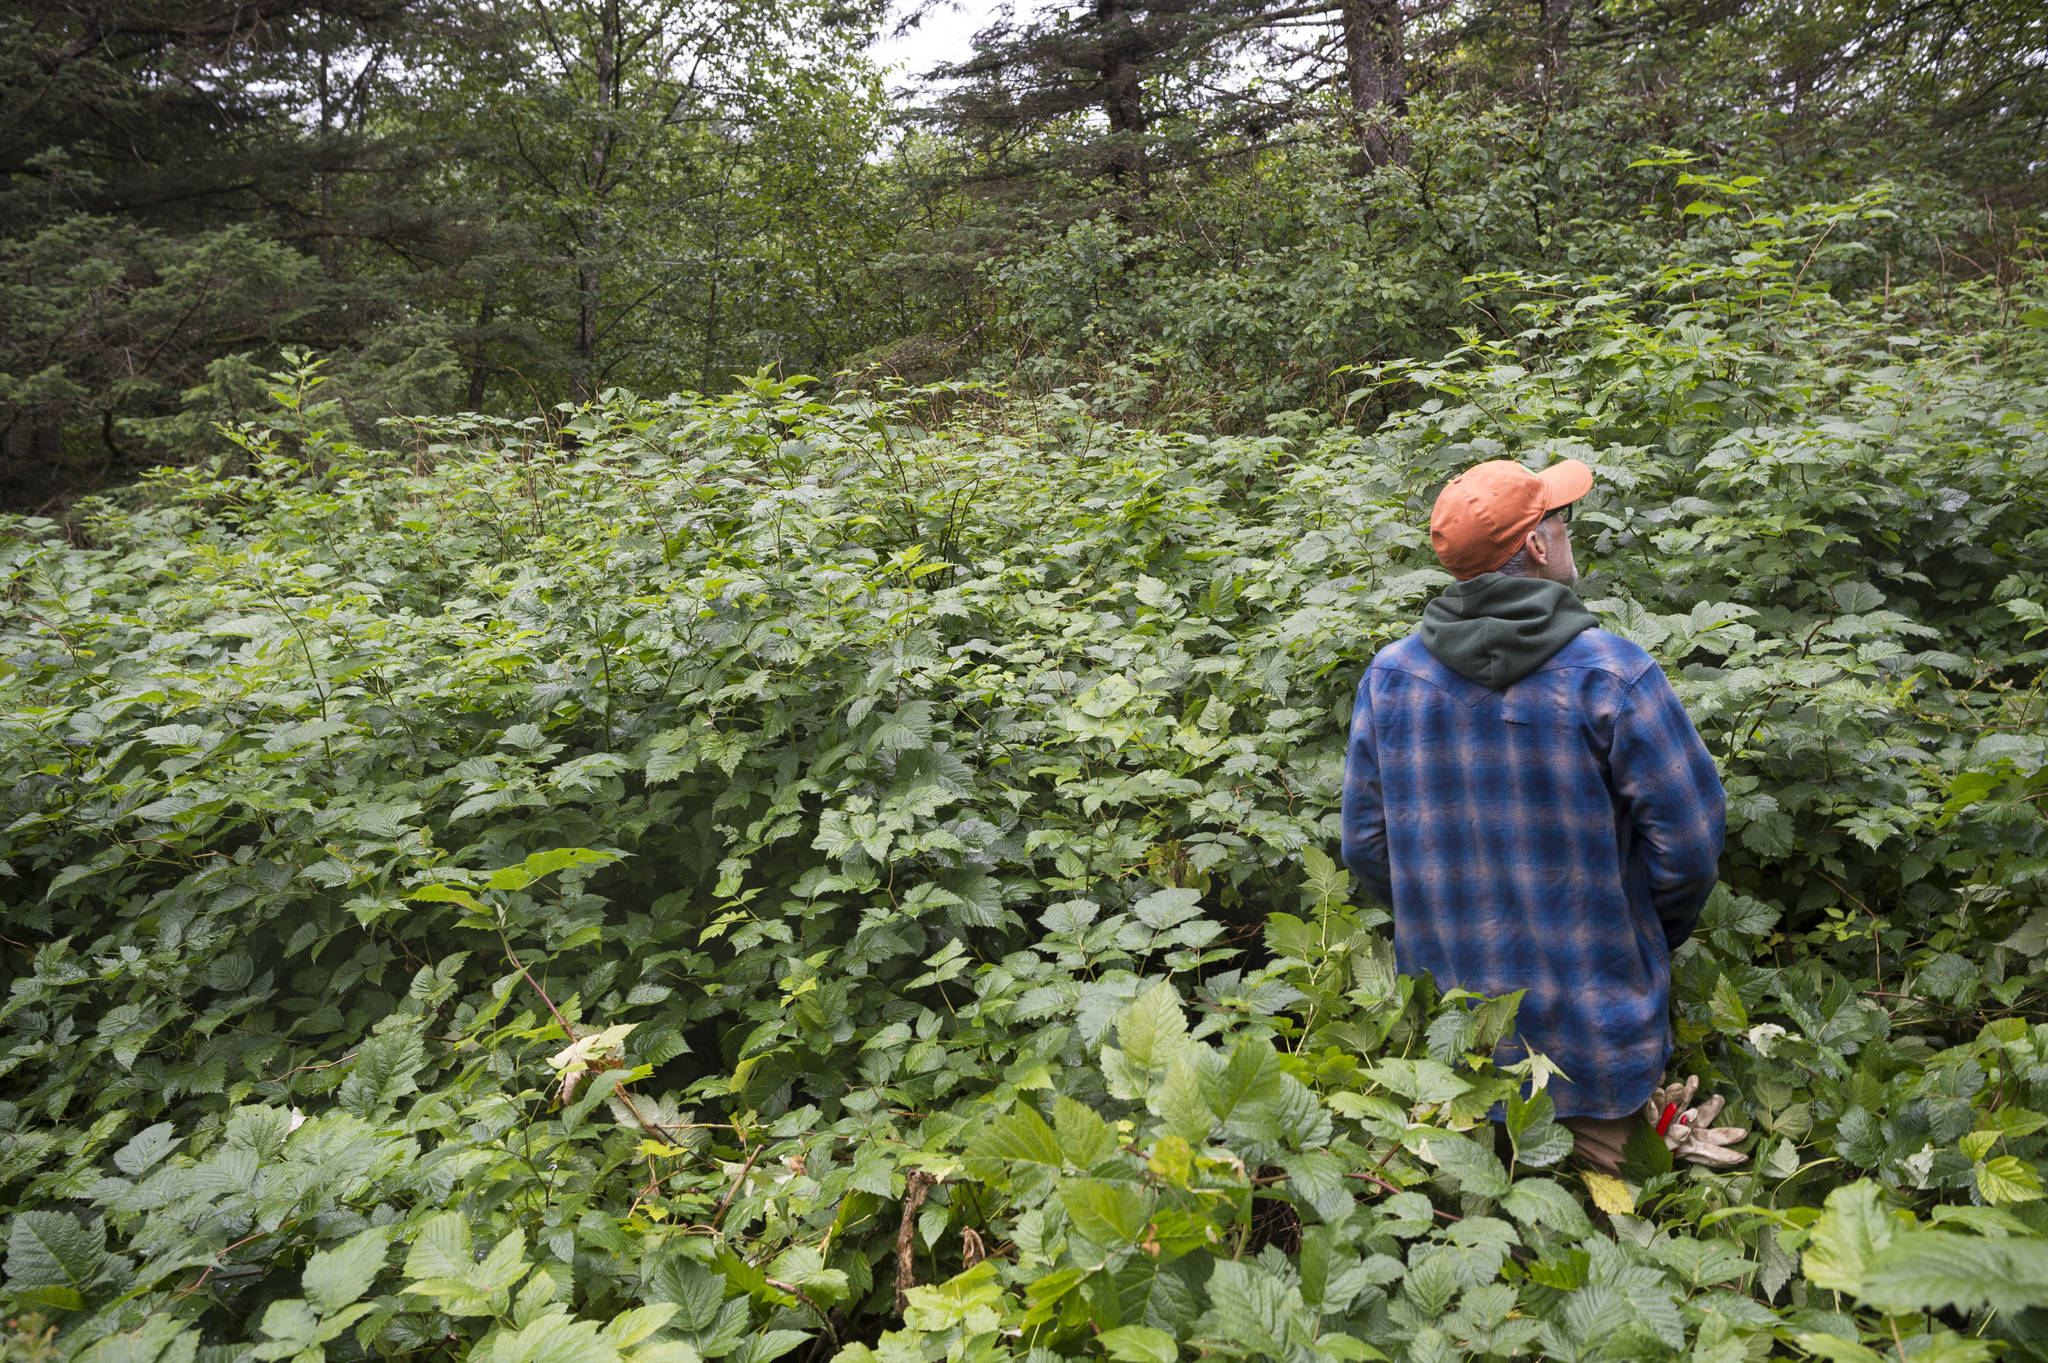 Ben Patterson, the city’s park maintenance supervisor, searches through head-tall bushes as he gives a tour of the cemetery sections in Douglas on Monday, August 13, 2018. (Michael Penn | Juneau Empire)